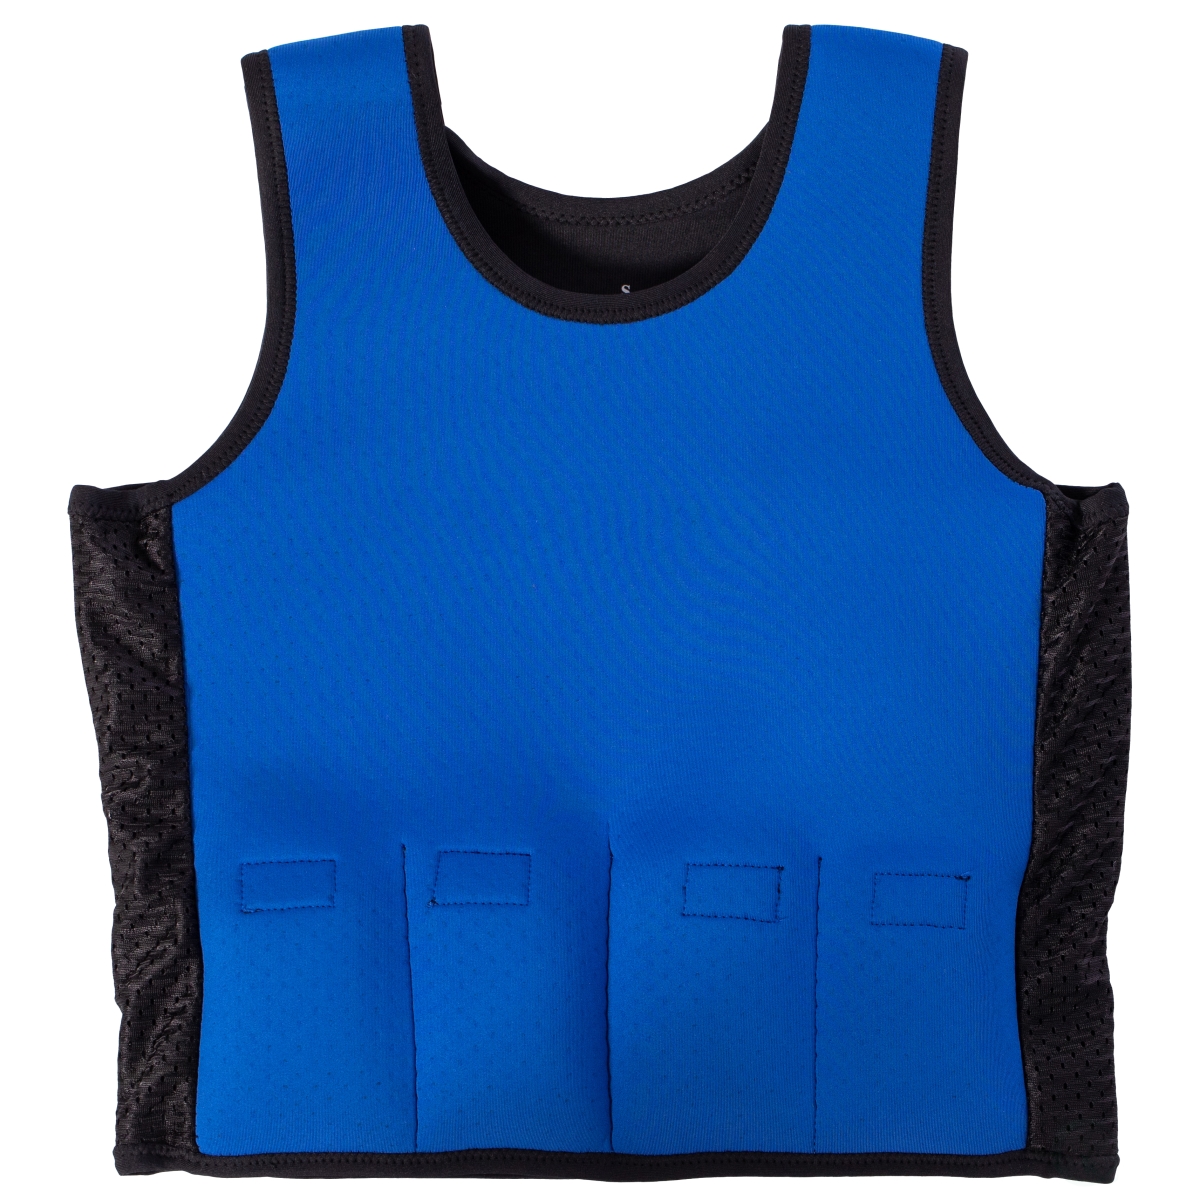 Picture of ShpilMaster QI004618.L Weighted Sensory Compression Vest for Calming Deep Pressure Therapy and Sensory Integration in Autism, ADHD, and Special Needs Individuals - Large